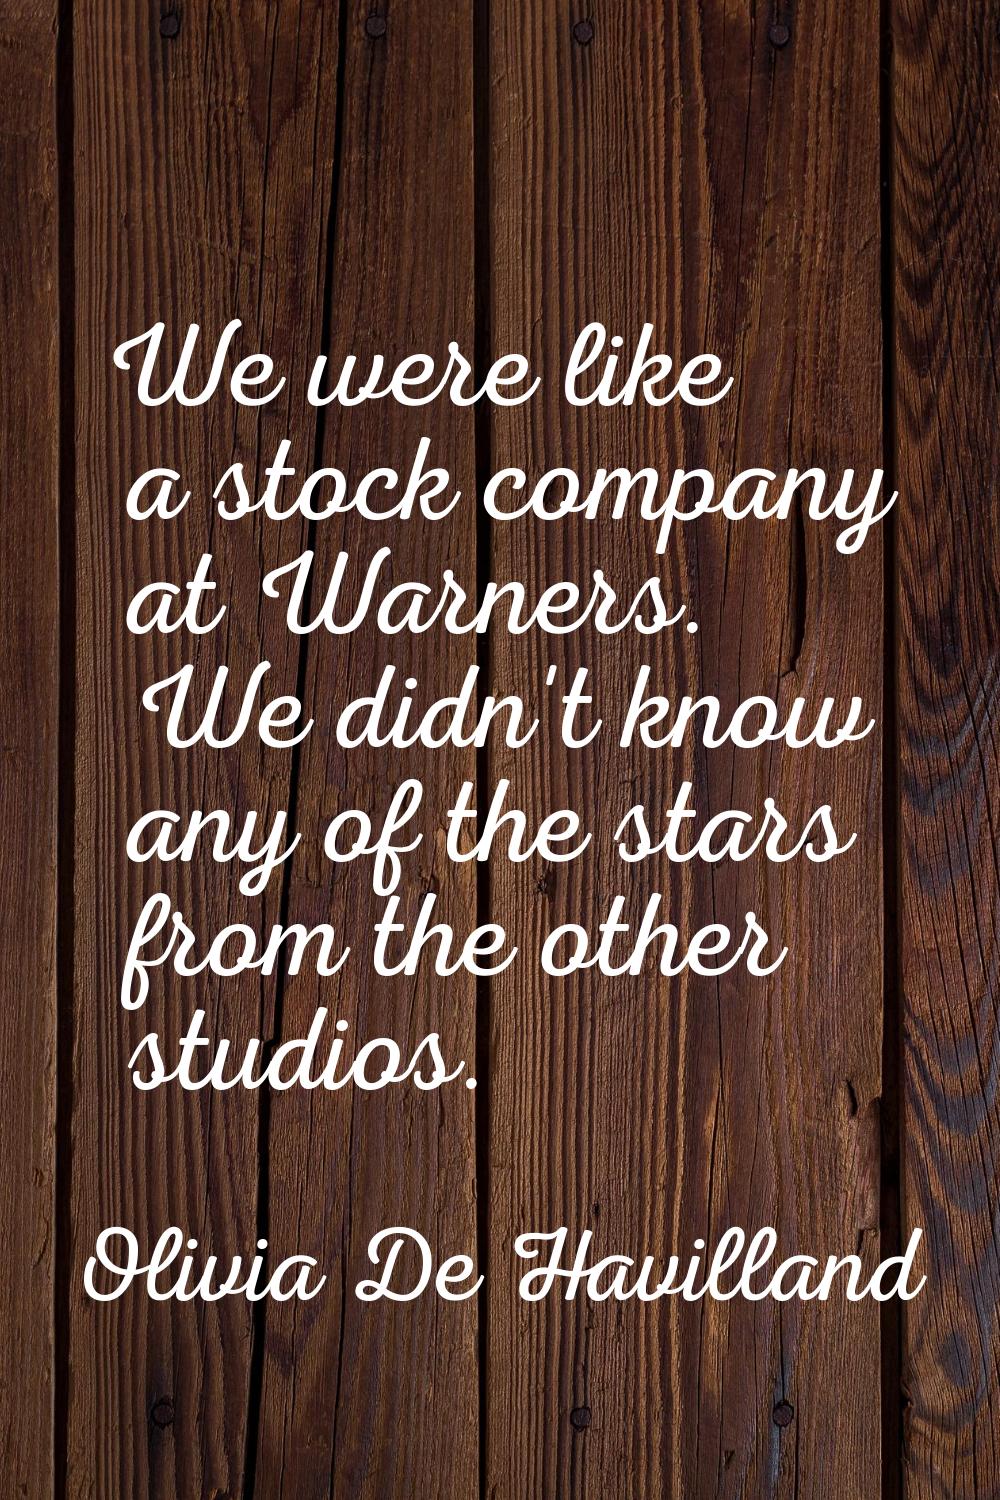 We were like a stock company at Warners. We didn't know any of the stars from the other studios.